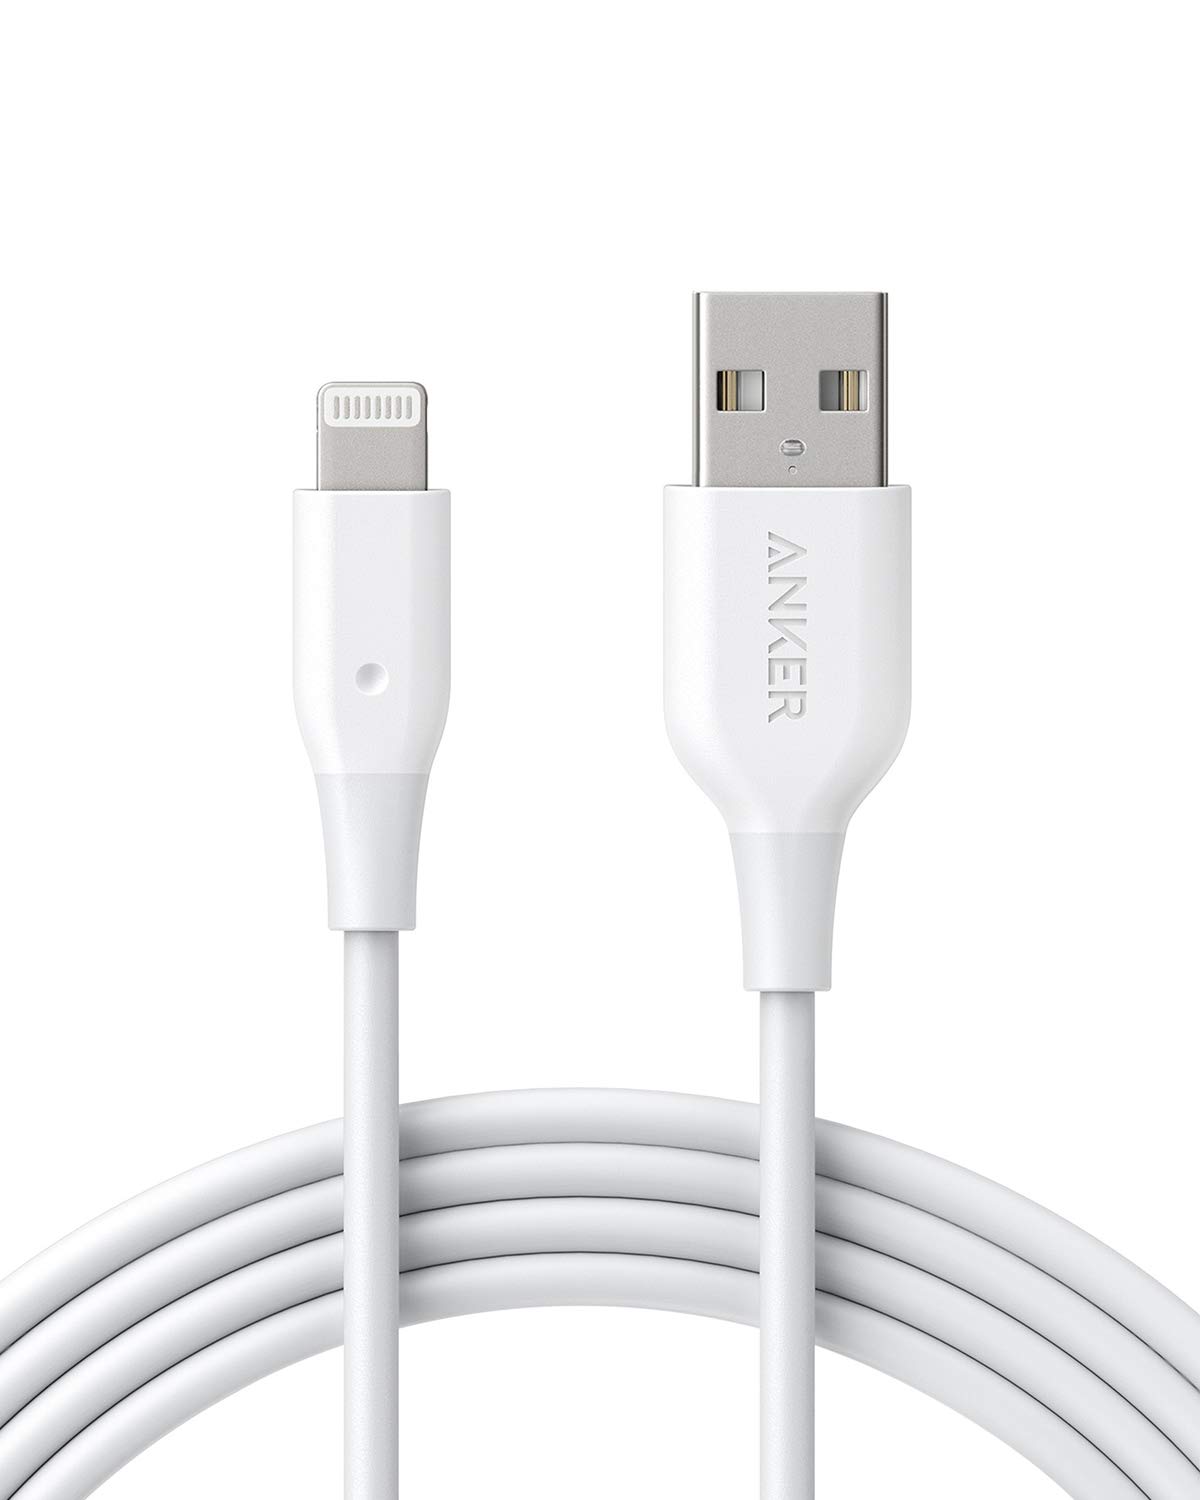 Book Cover Anker Powerline Lightning to USB Cable, (6 ft MFi Certified), Charging/Sync Lightning Cord Compatible with iPhone 11 Pro/Xs Max/XR/X / 8/7 / 6S / 6, iPad and More (Upgraded) 6ft White